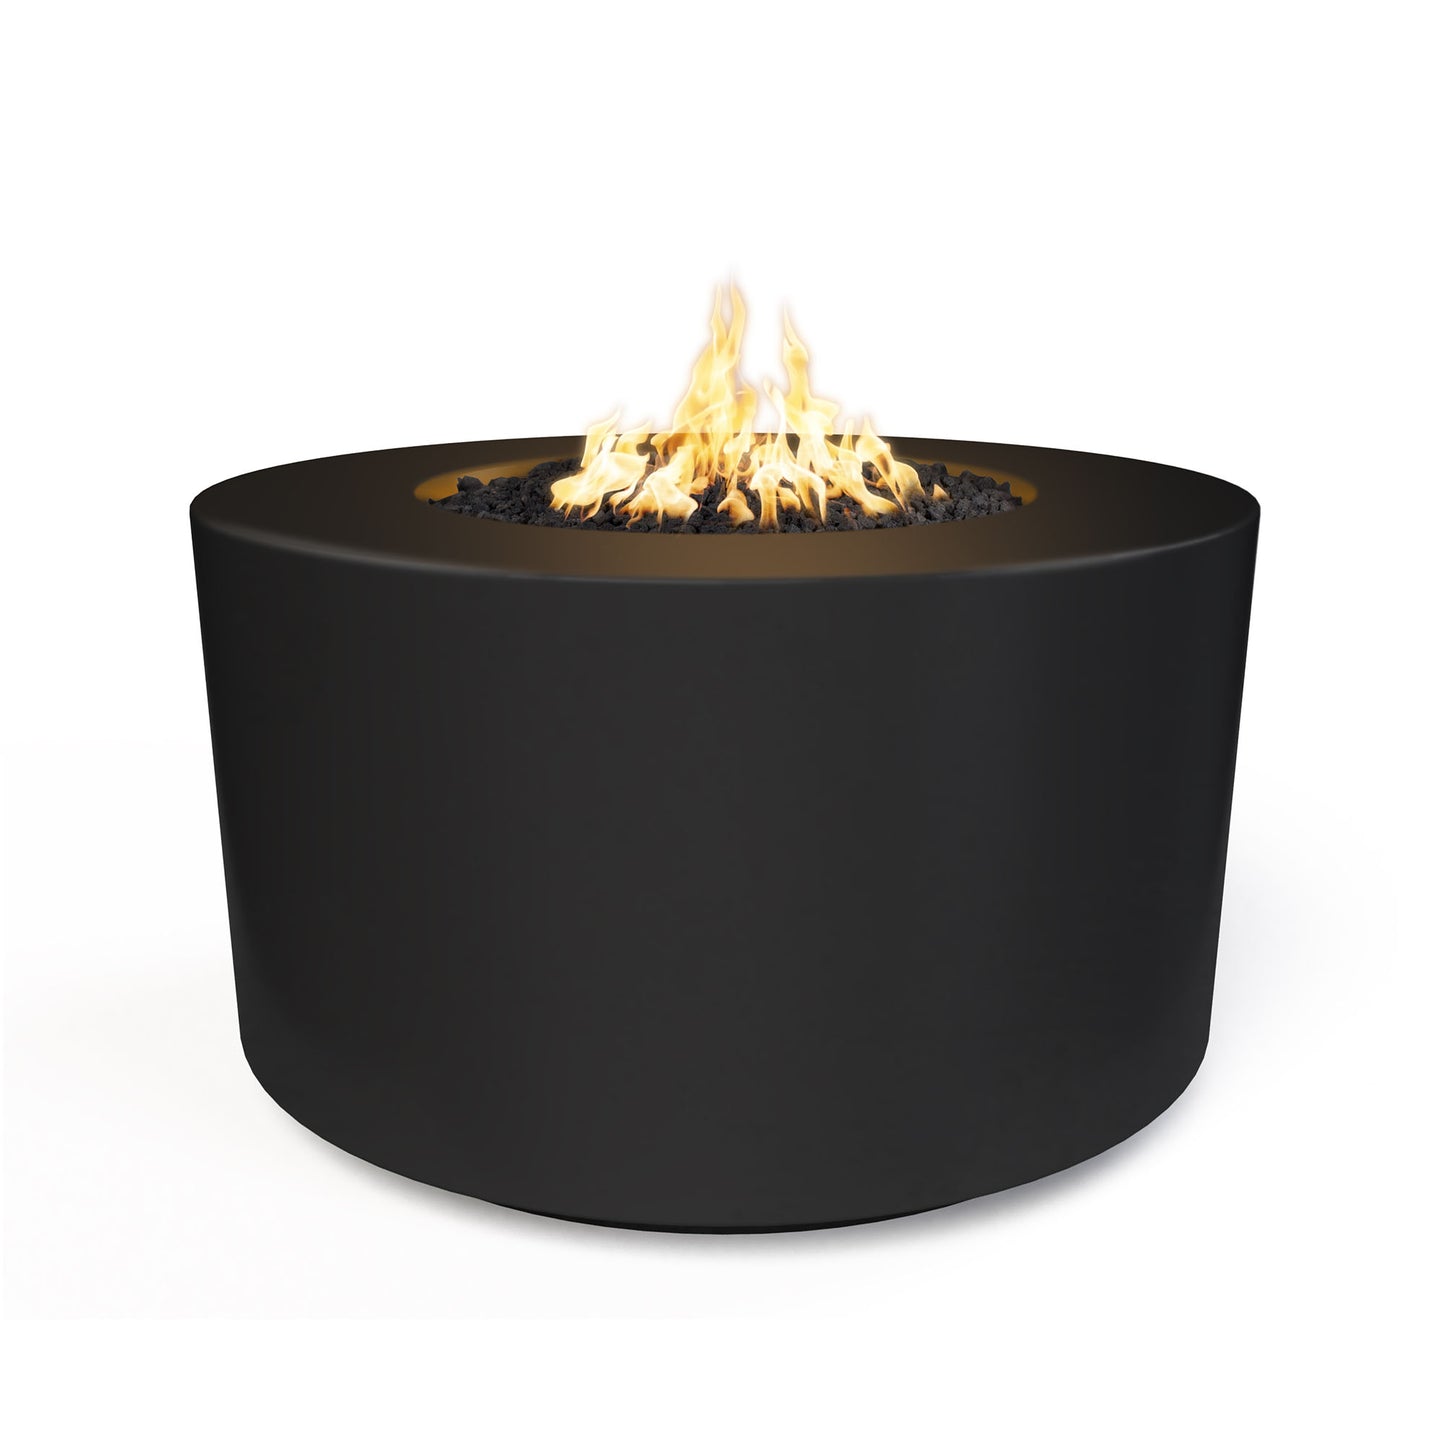 The Outdoor Plus Florence Fire Pit